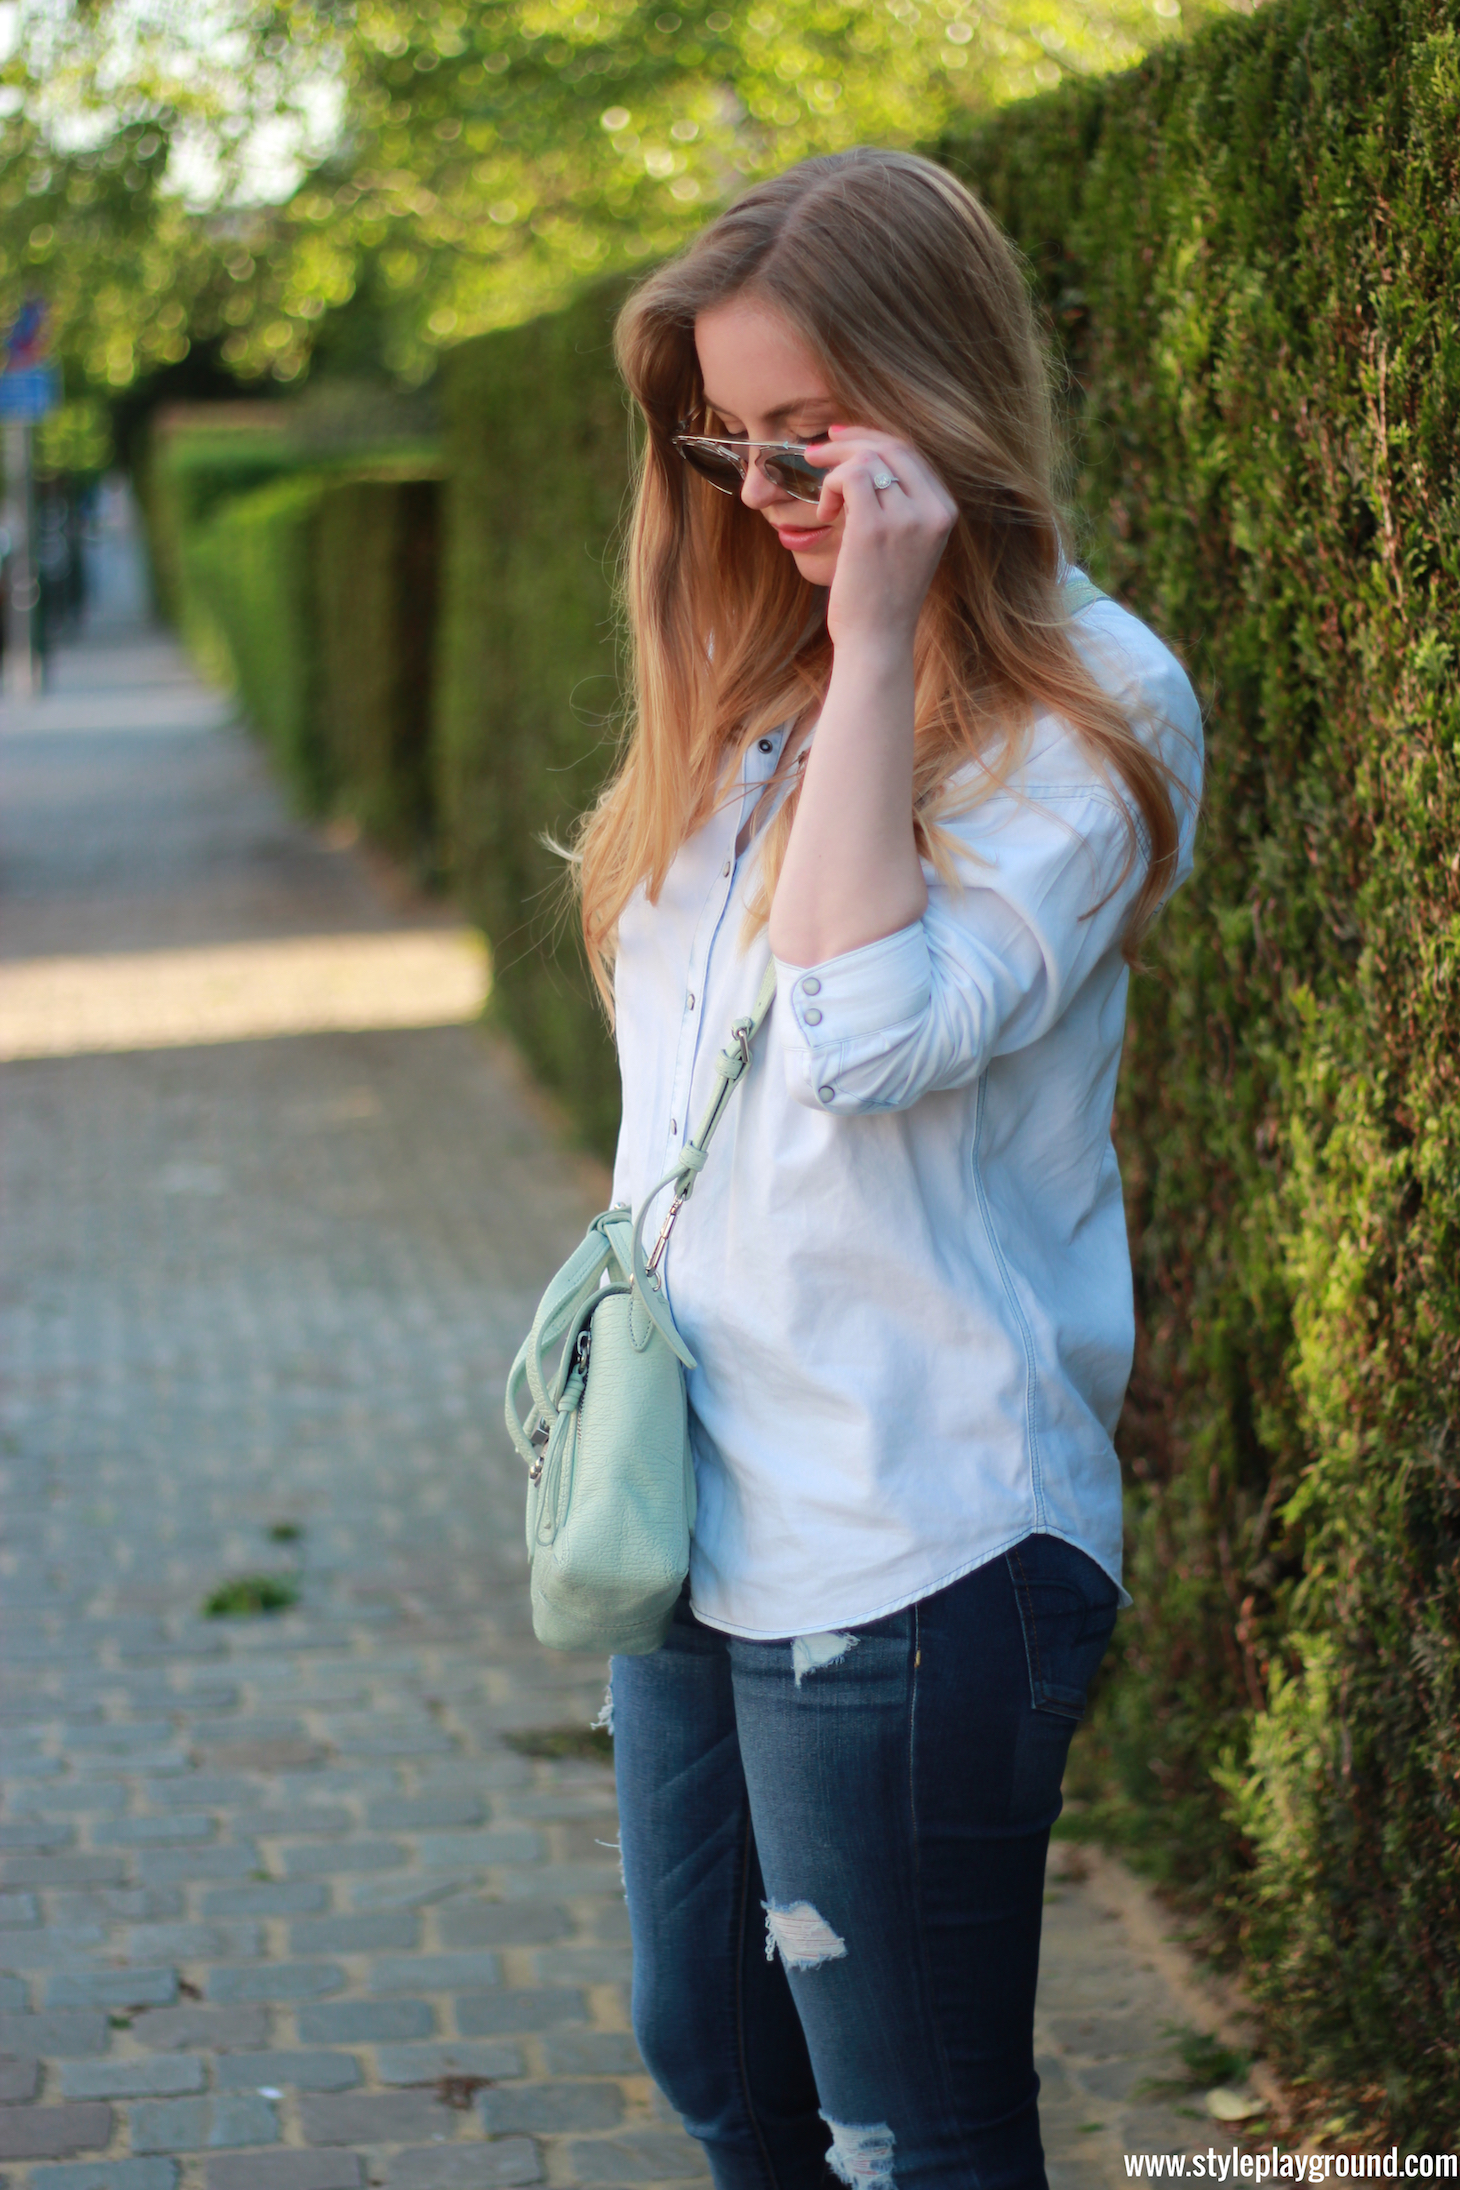 Axelle Blanpain of Style playground is wearing a Zara denim shirt, American Eagle ripped jeans, white Converse, Phillip Lim bag, Tiffany T bracelet and Cartier love bracelet